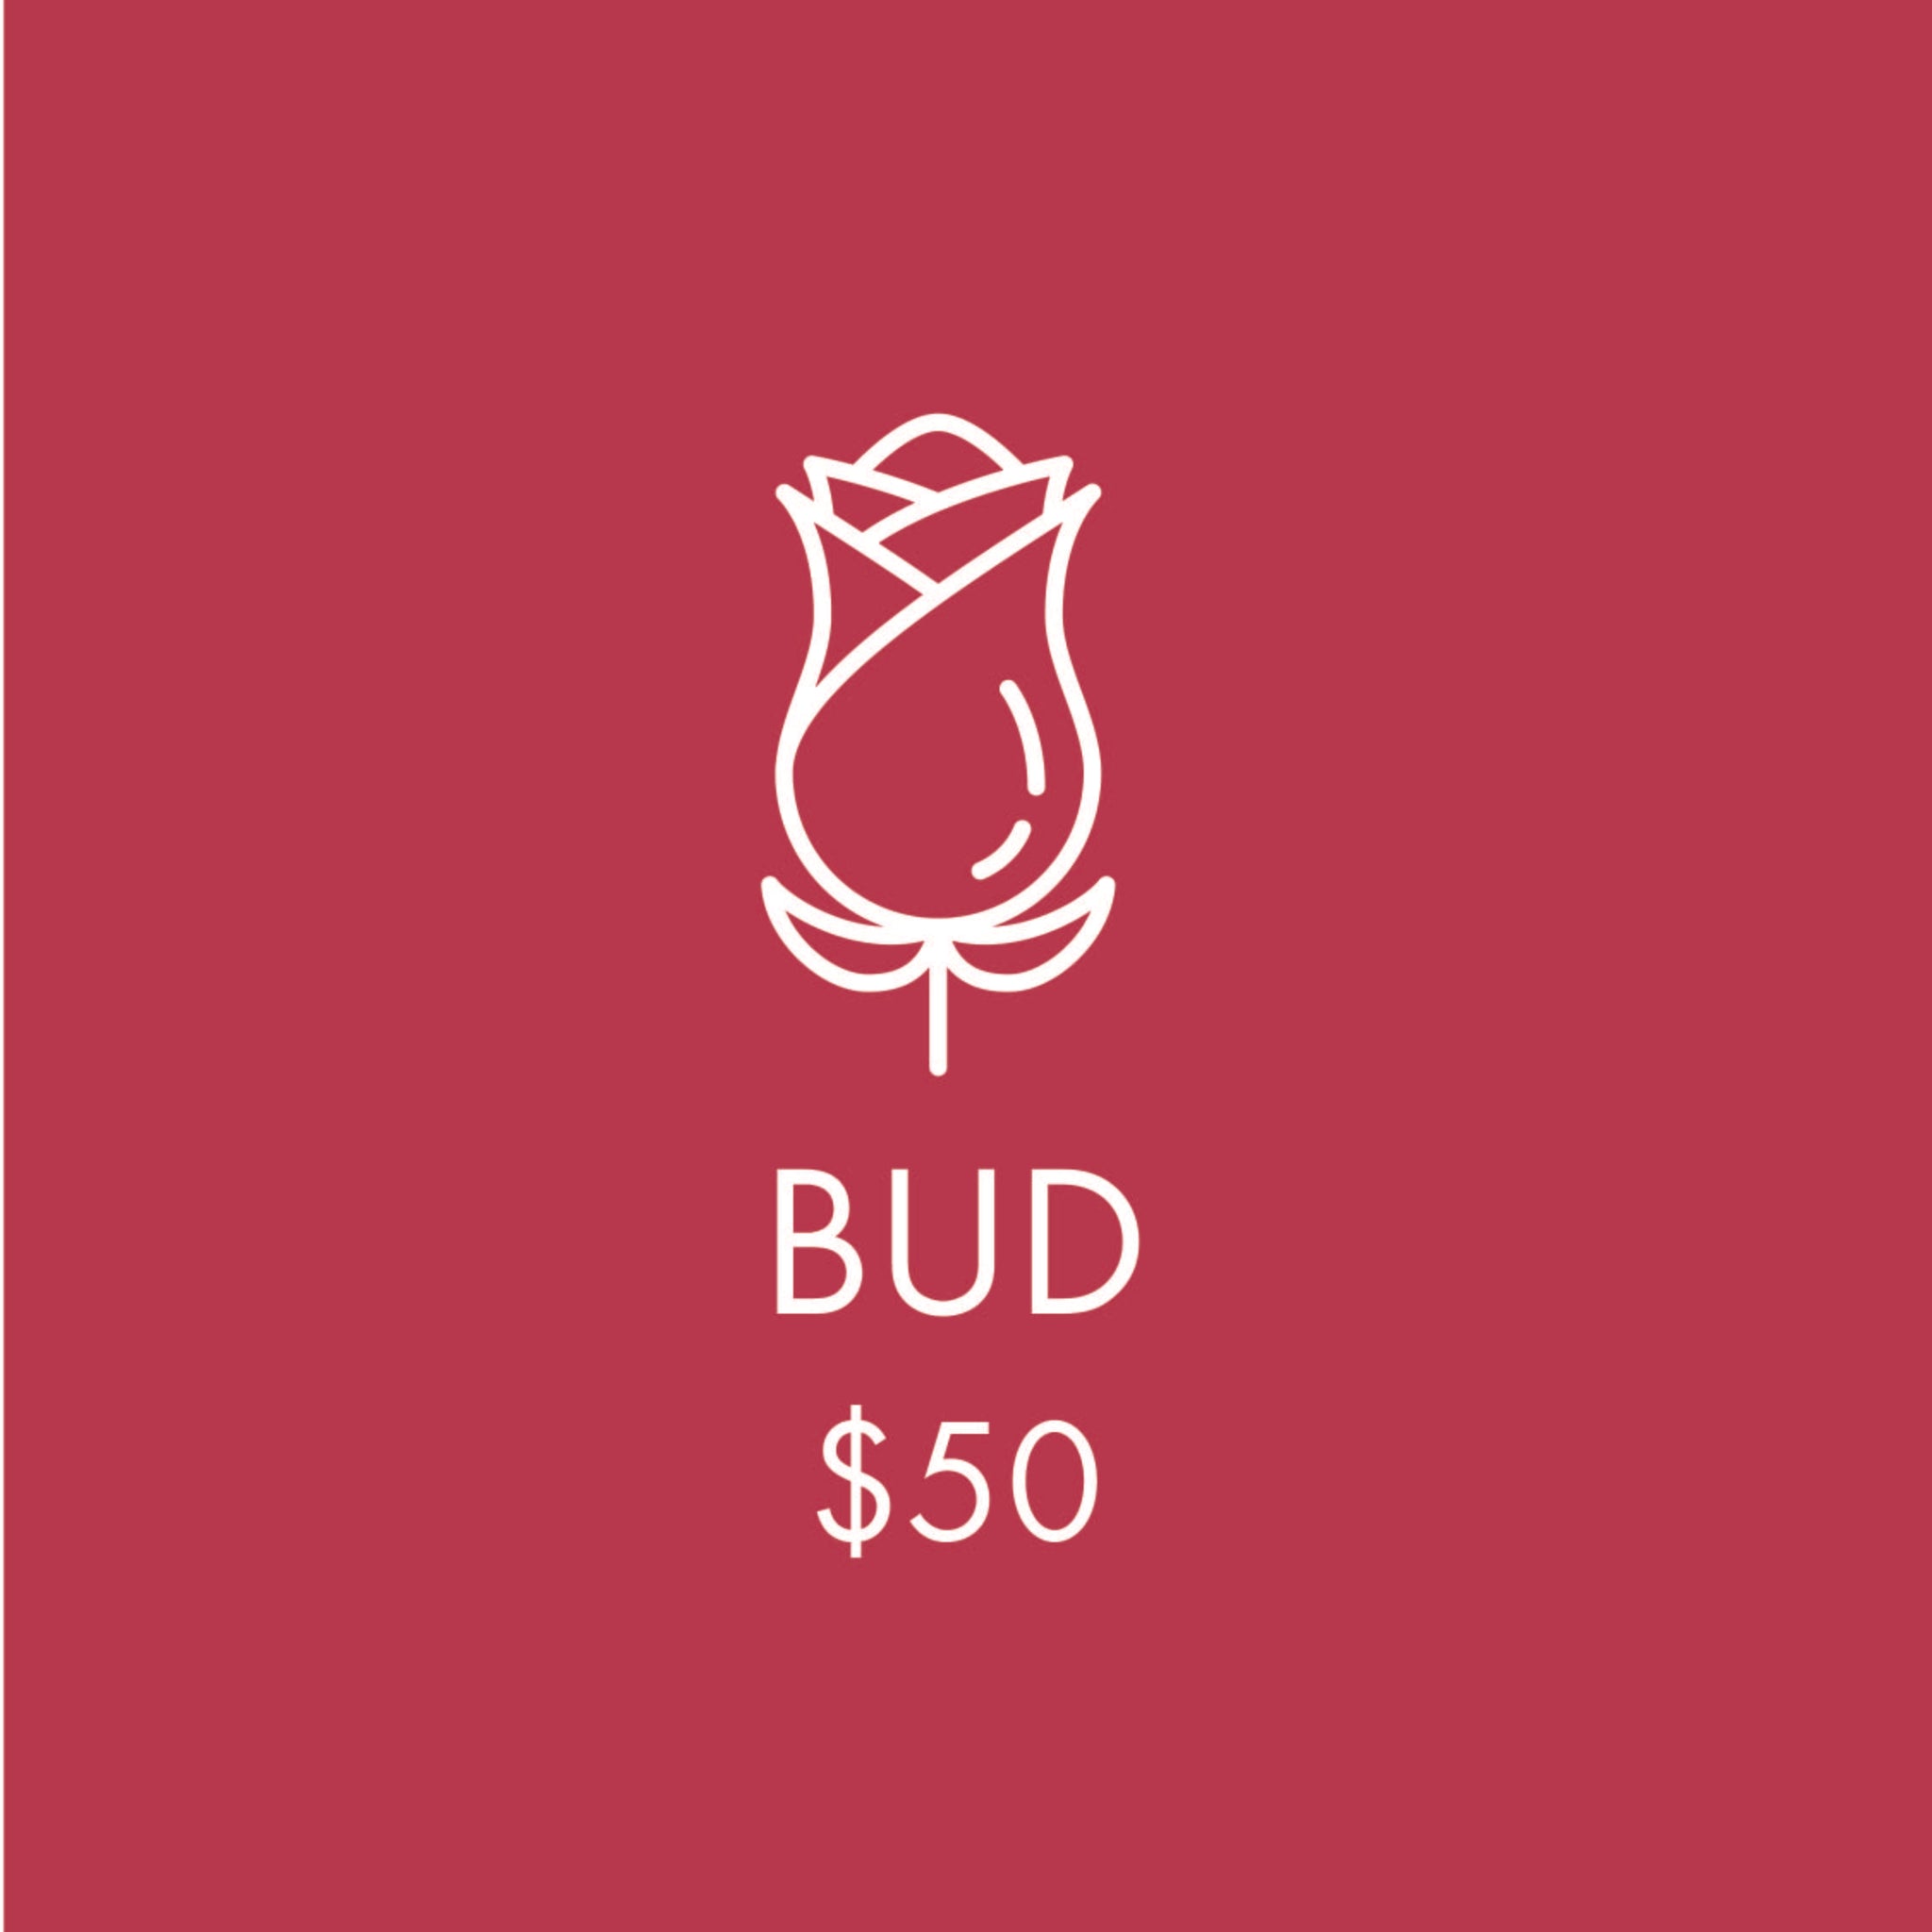 Support LongHouse  - Bud $50